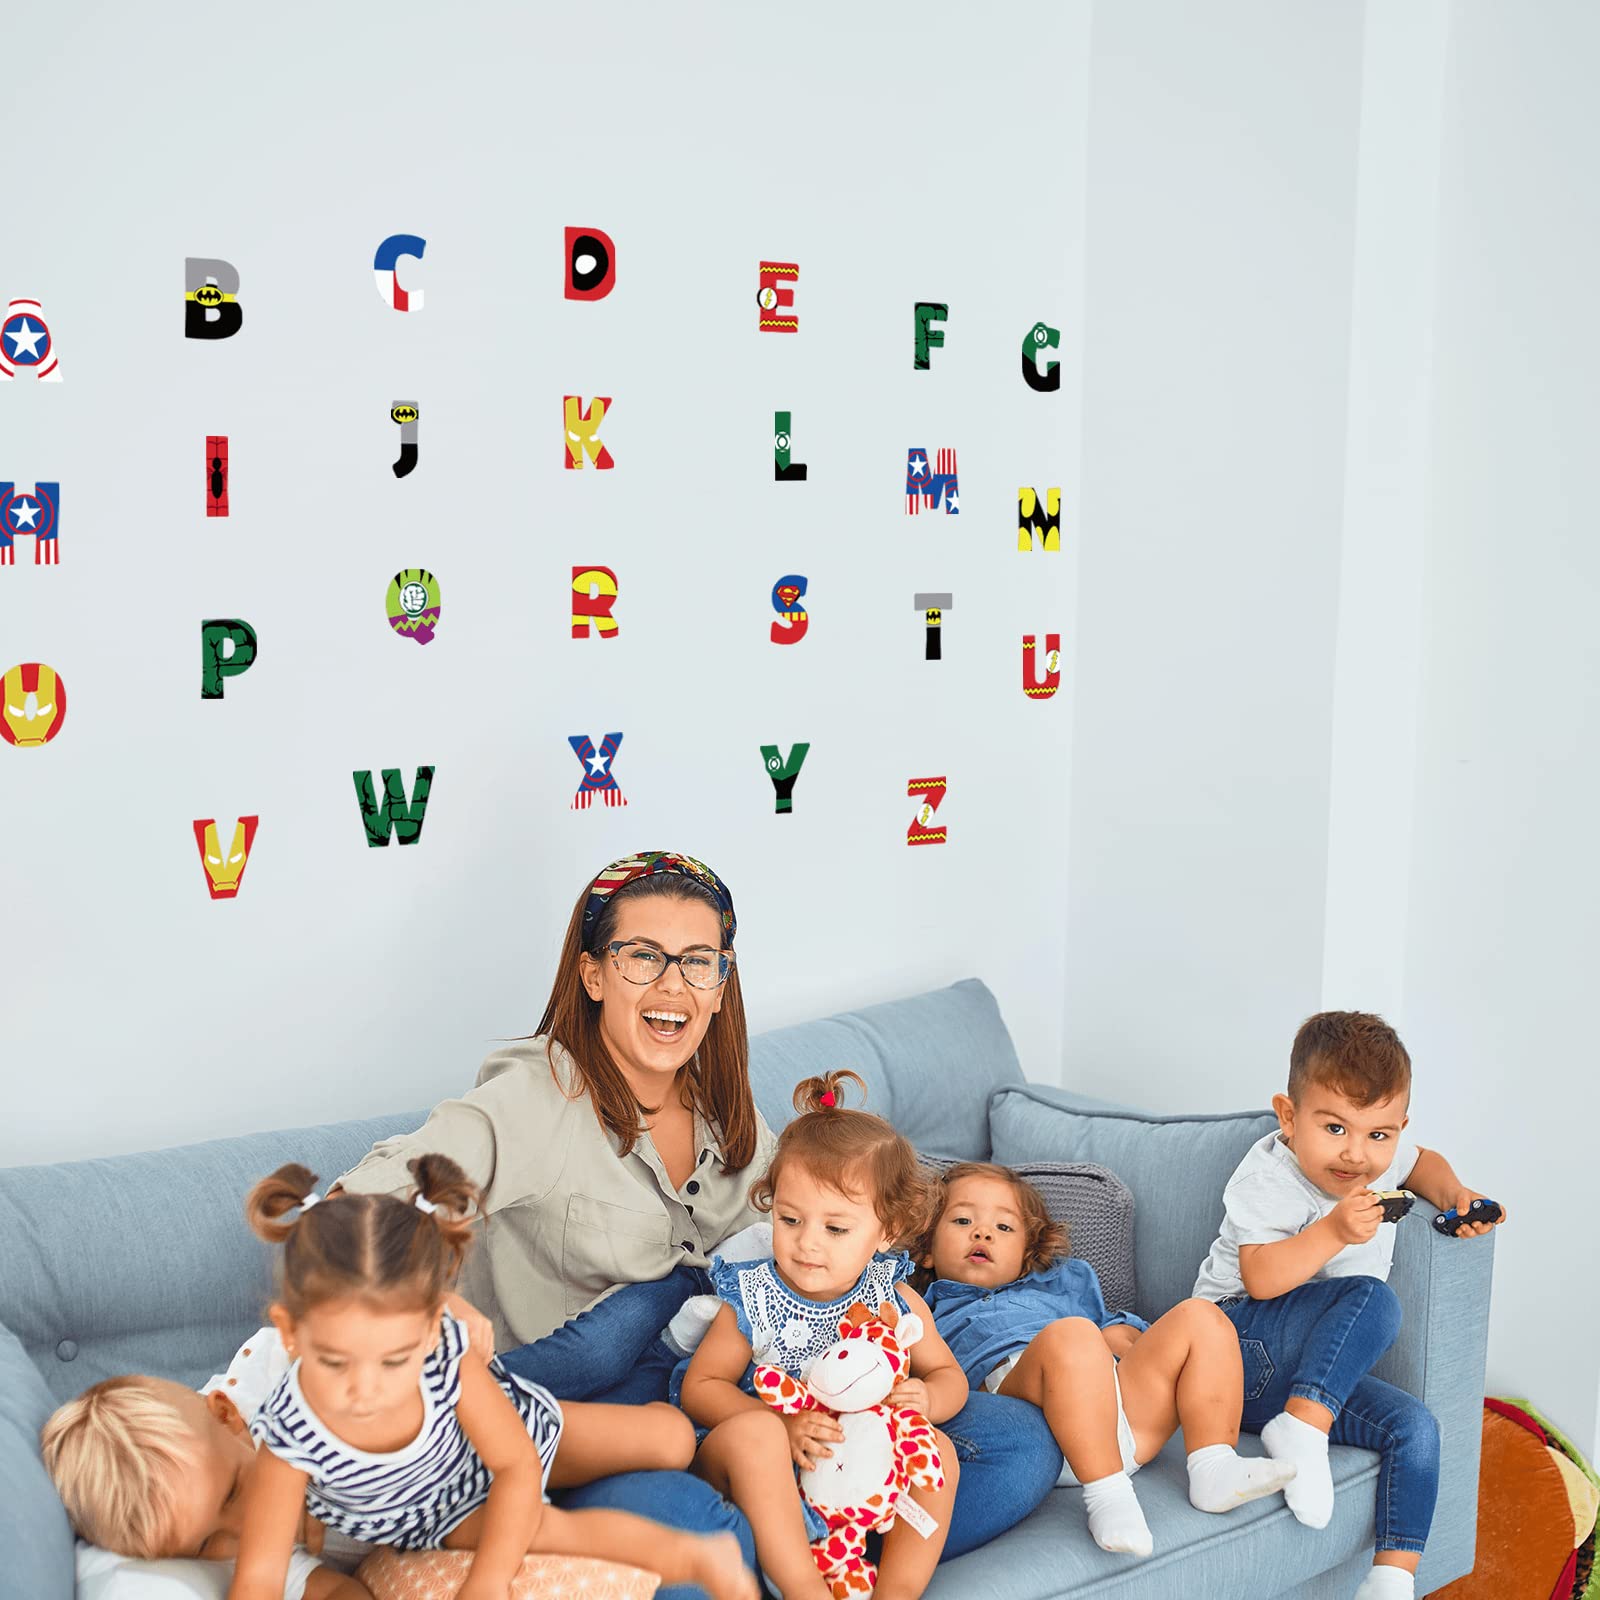 Alphabets Stickers ABC Letters Wall Stickers Kids Wall Decal Peel and Stick for Baby Boys Girls Bedroom Nursery Playroom Daycare Kids Room Wall Decor